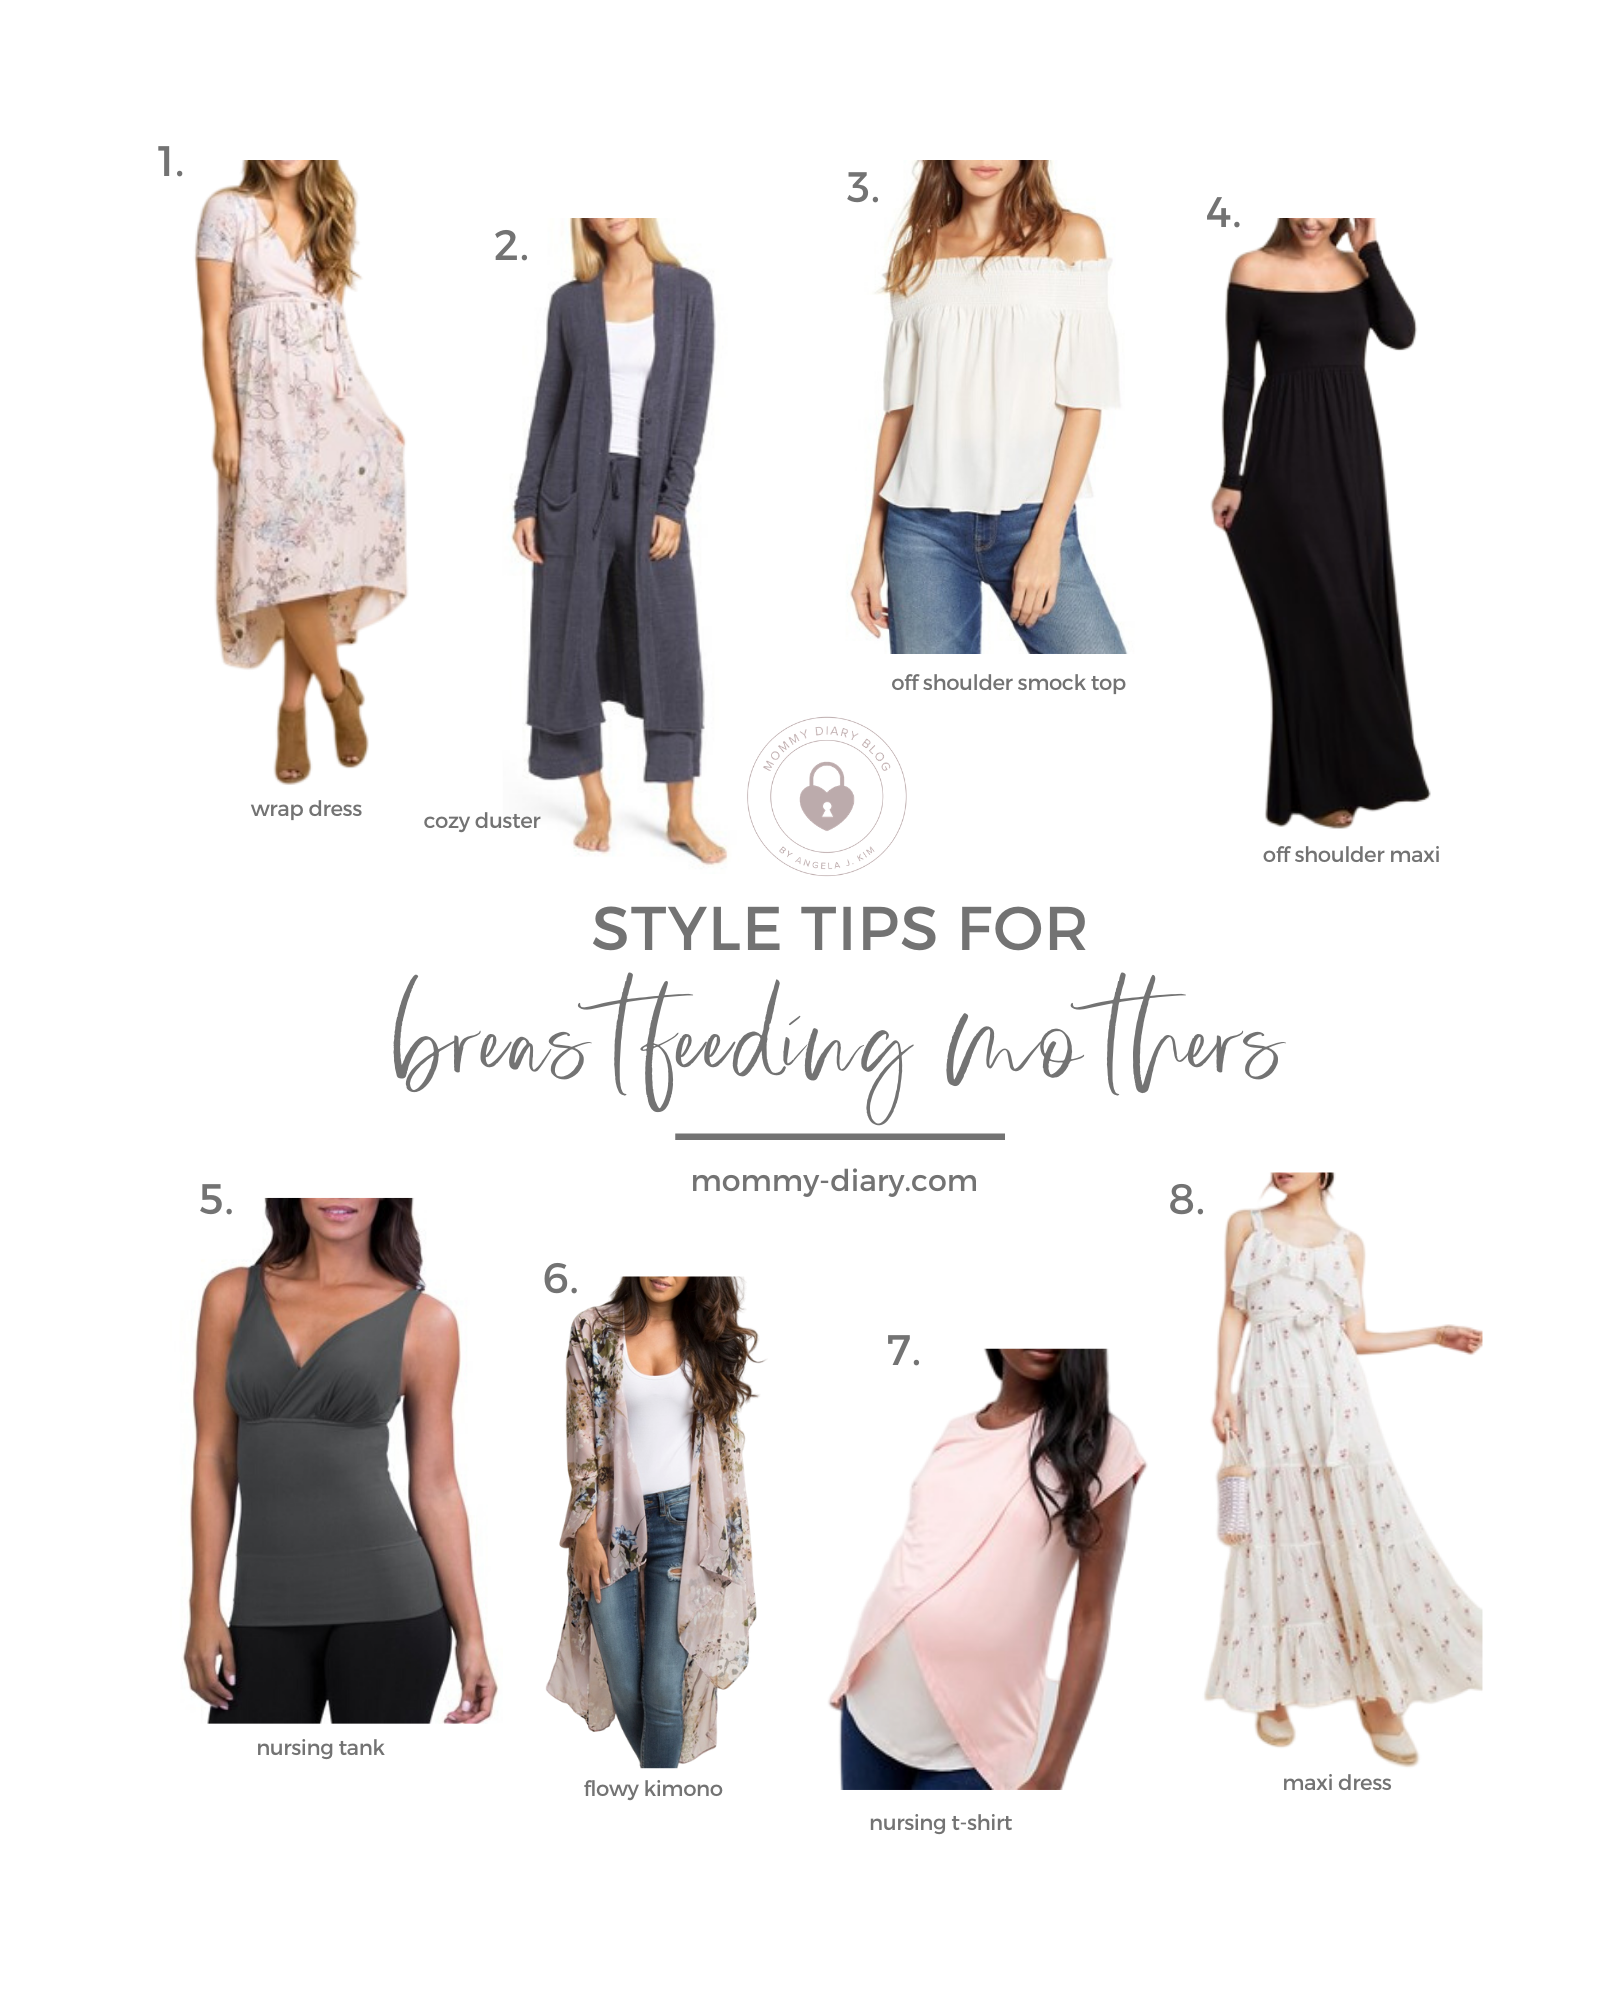 Style Tips For Breastfeeding Mothers | Mommy Diary